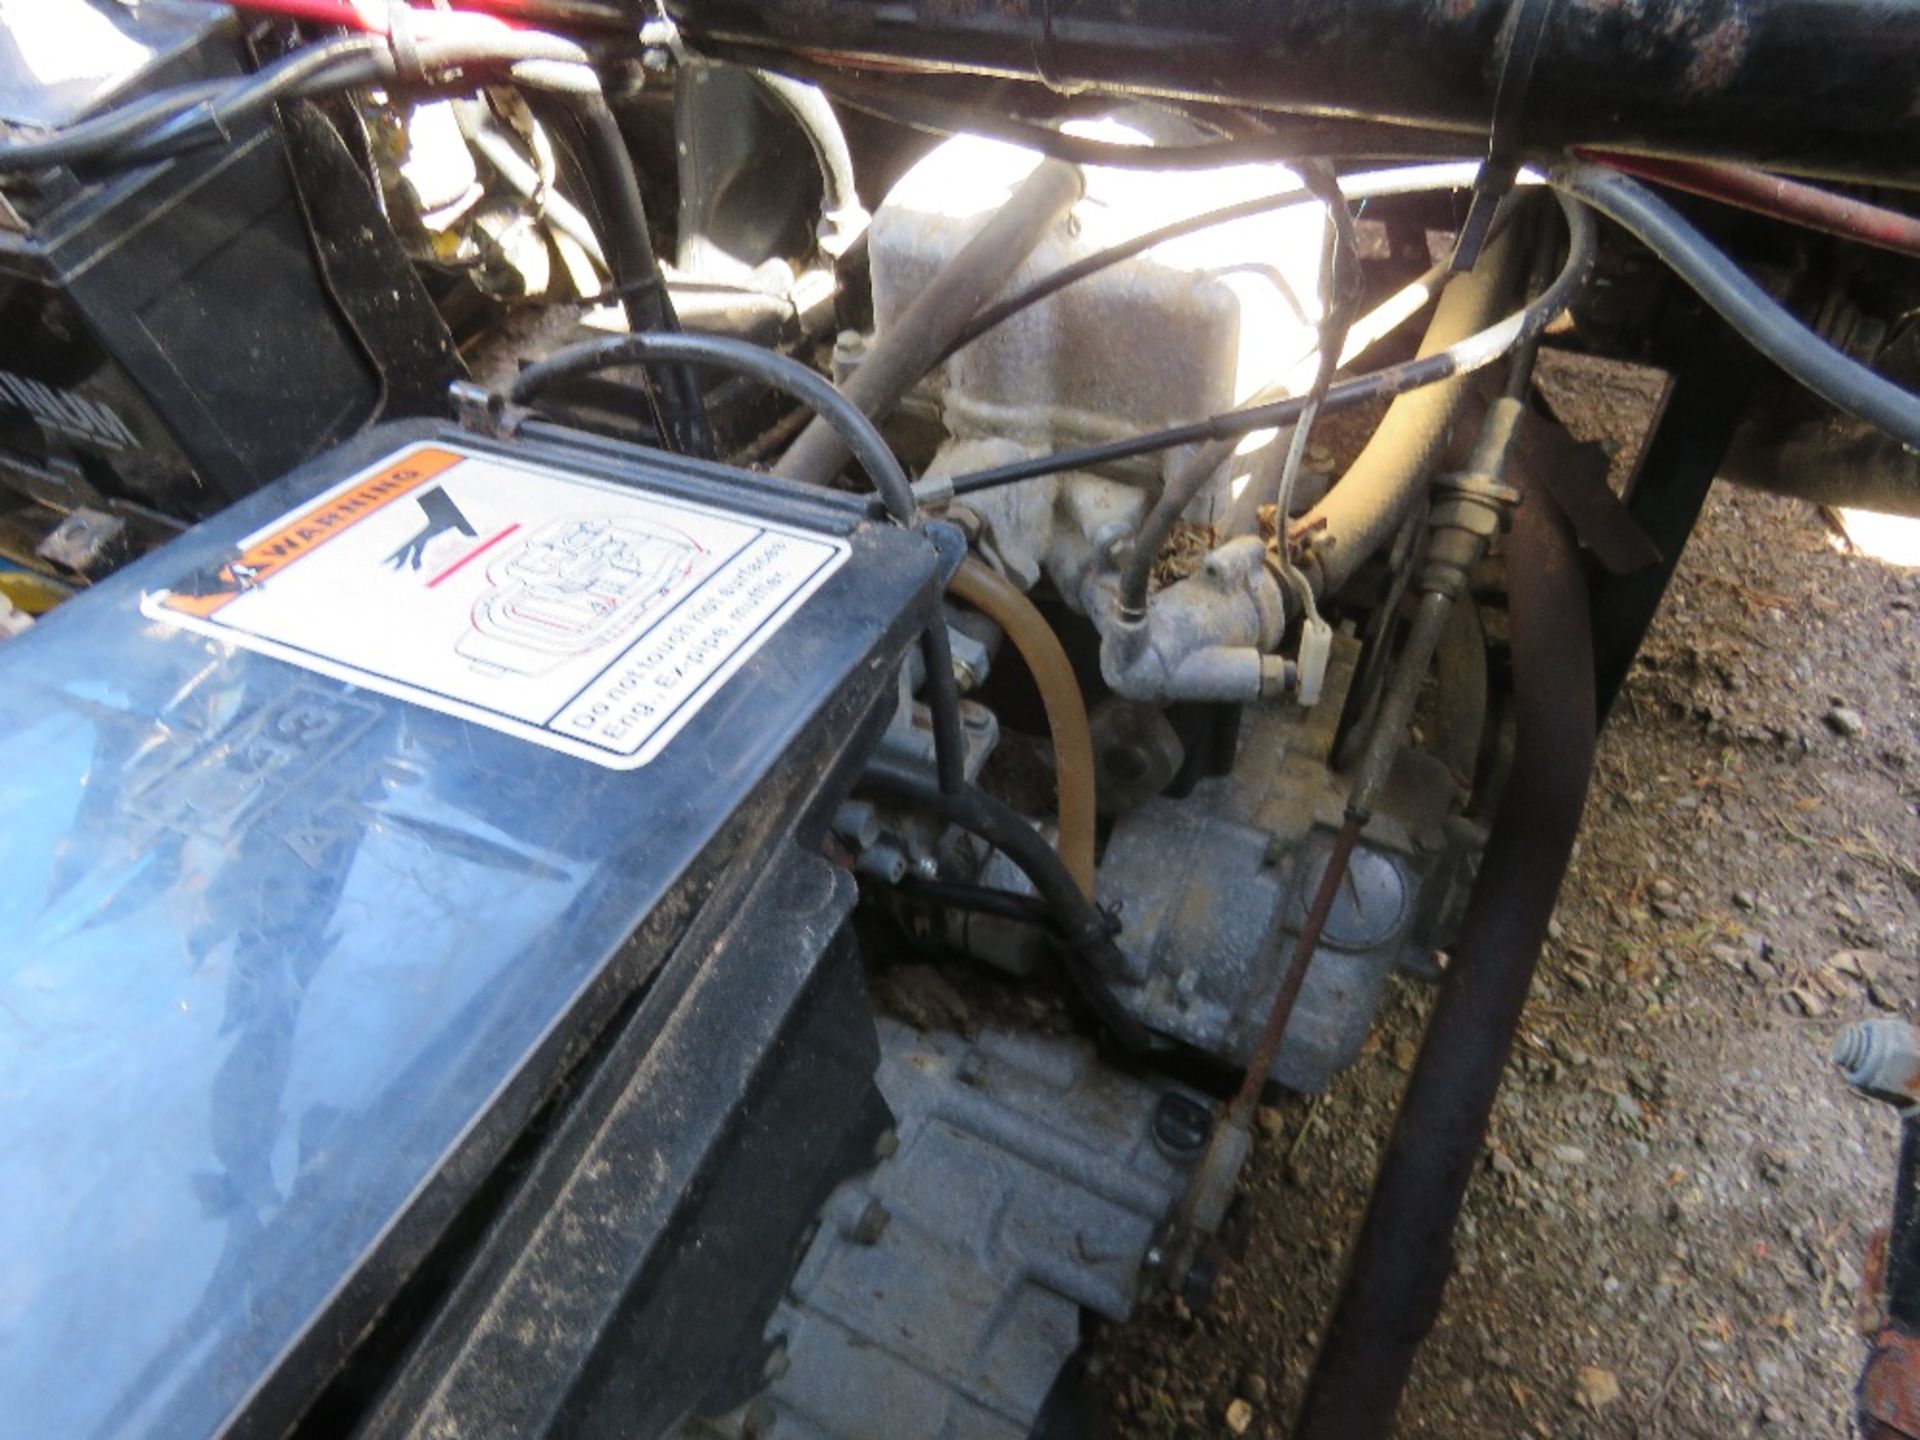 AEON CUBE PETROL ENGINED UTILITY VEHICLE WITH REAR BUCK. ON THE SAME SMALLHOLDING FROM NEW. WHEN TES - Image 13 of 13